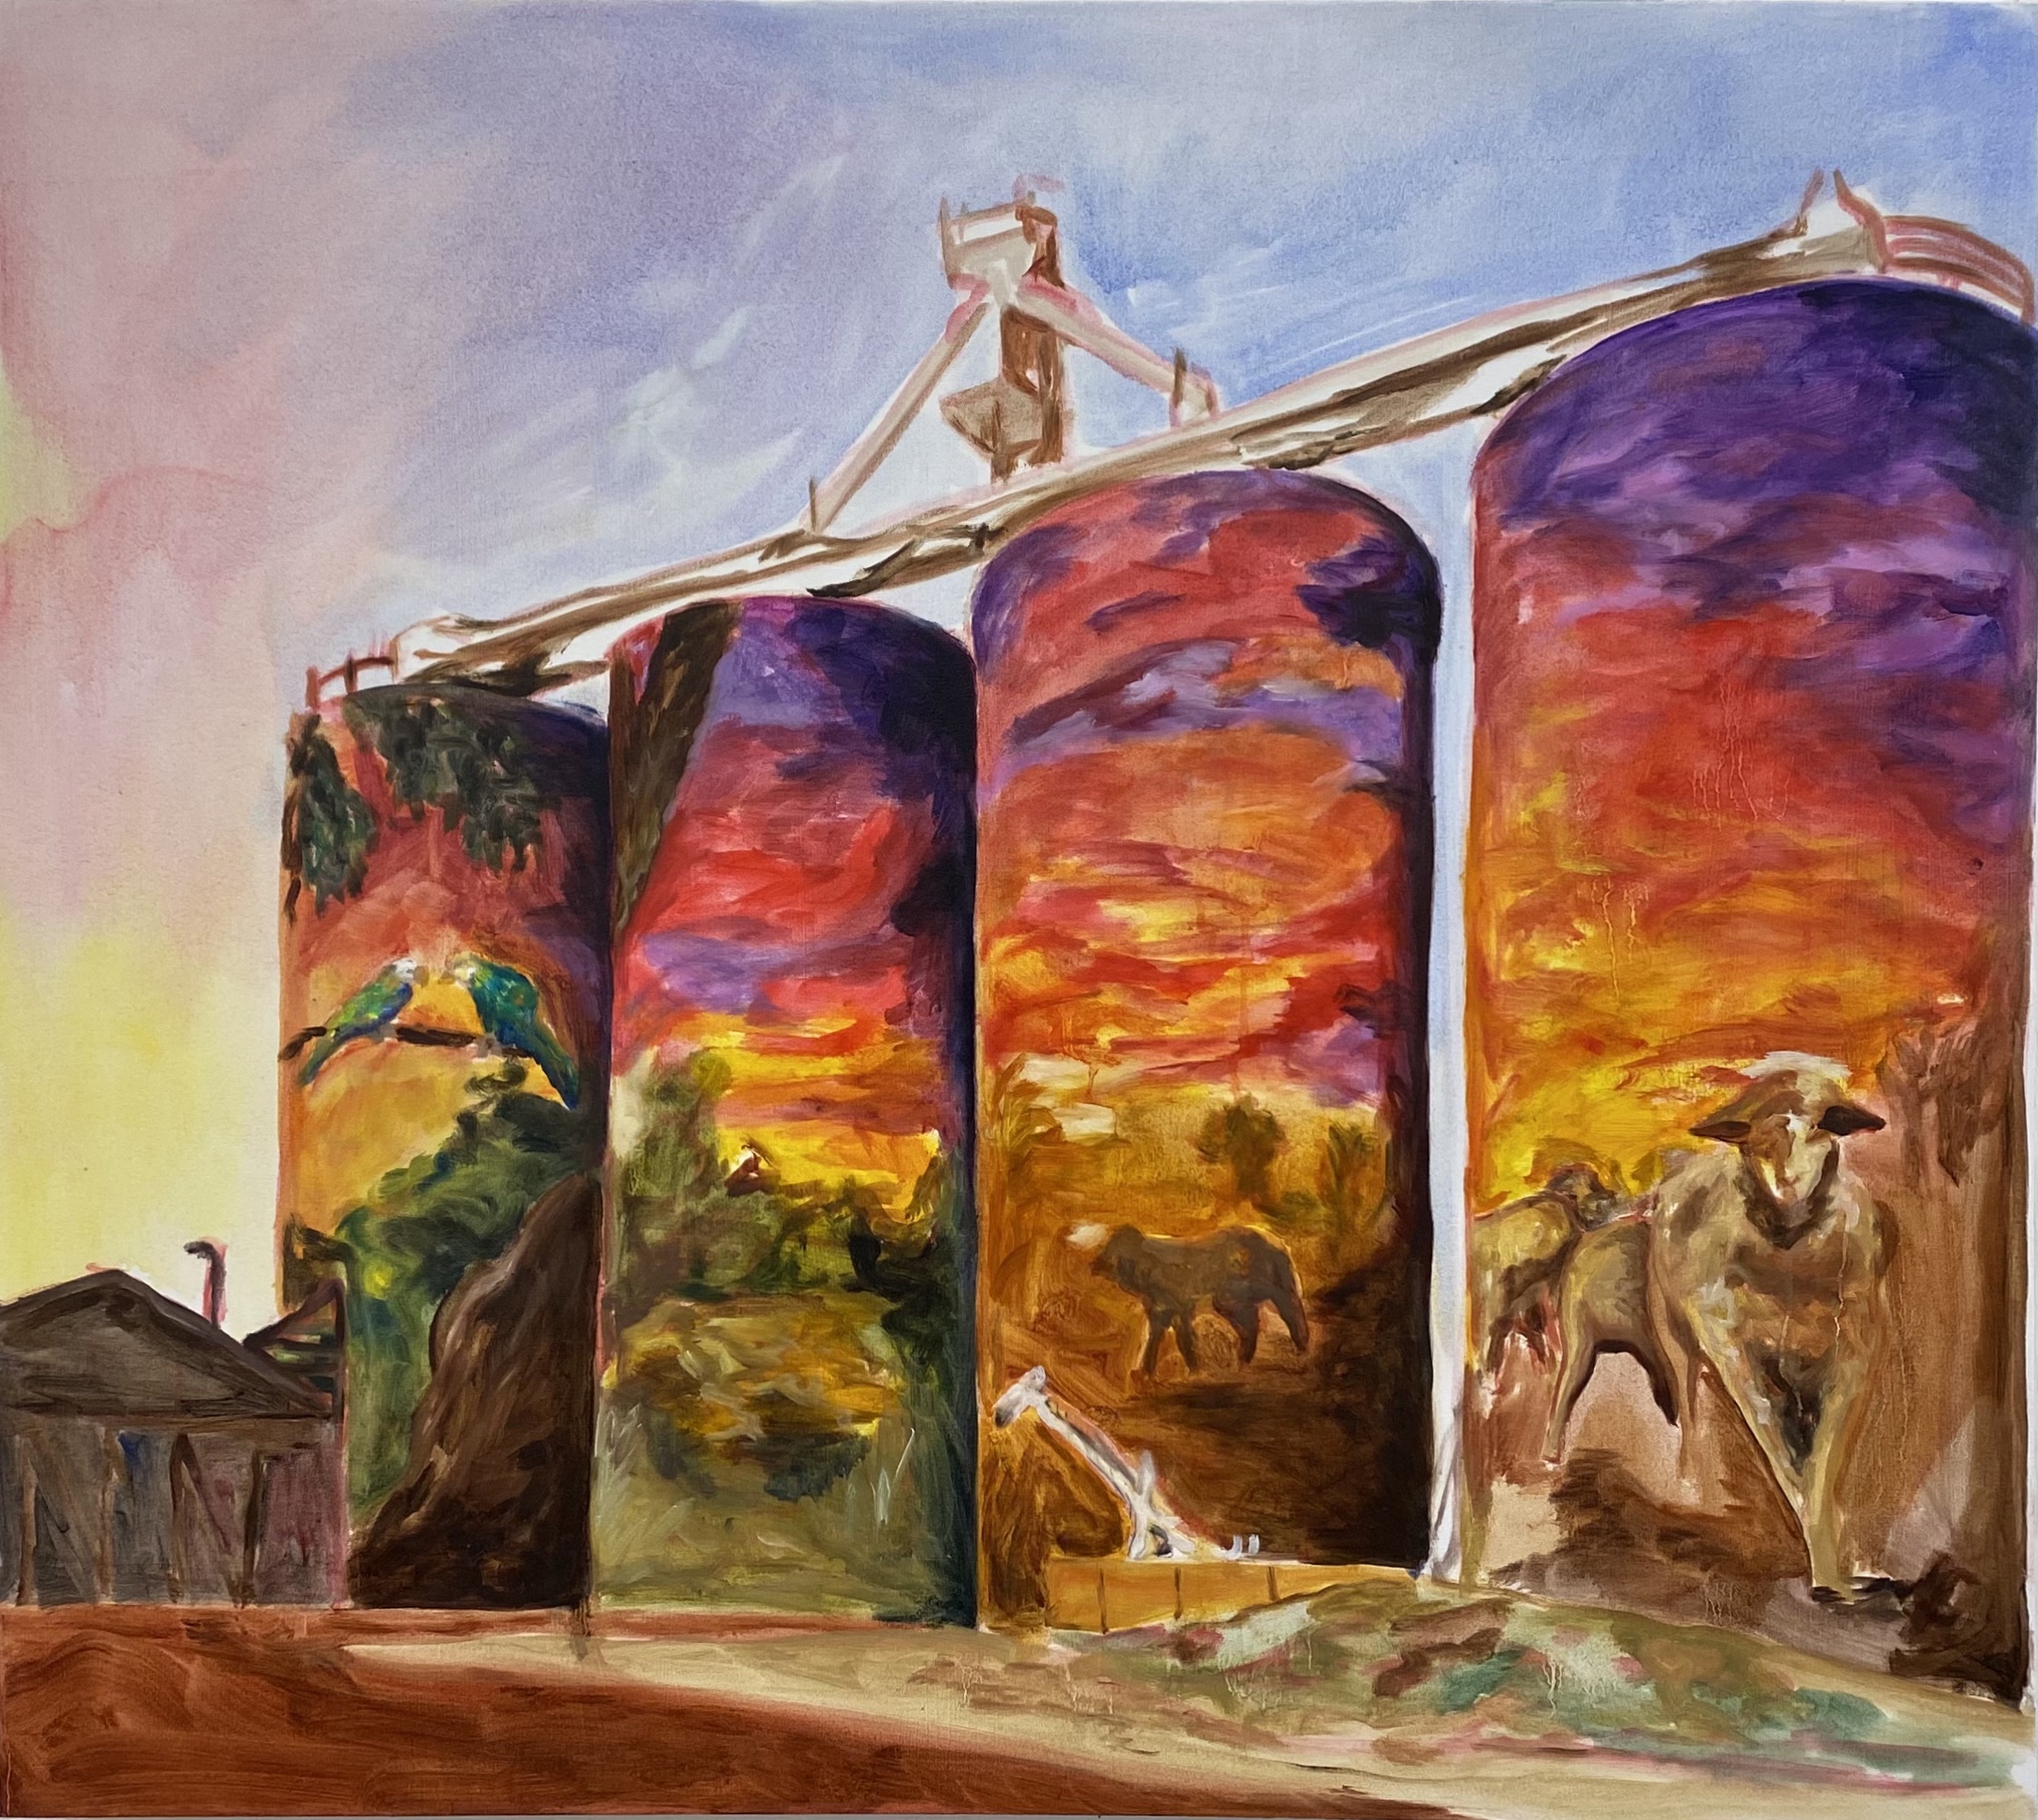 Thallon Silos at Sunset, print by Lucy Brosnan